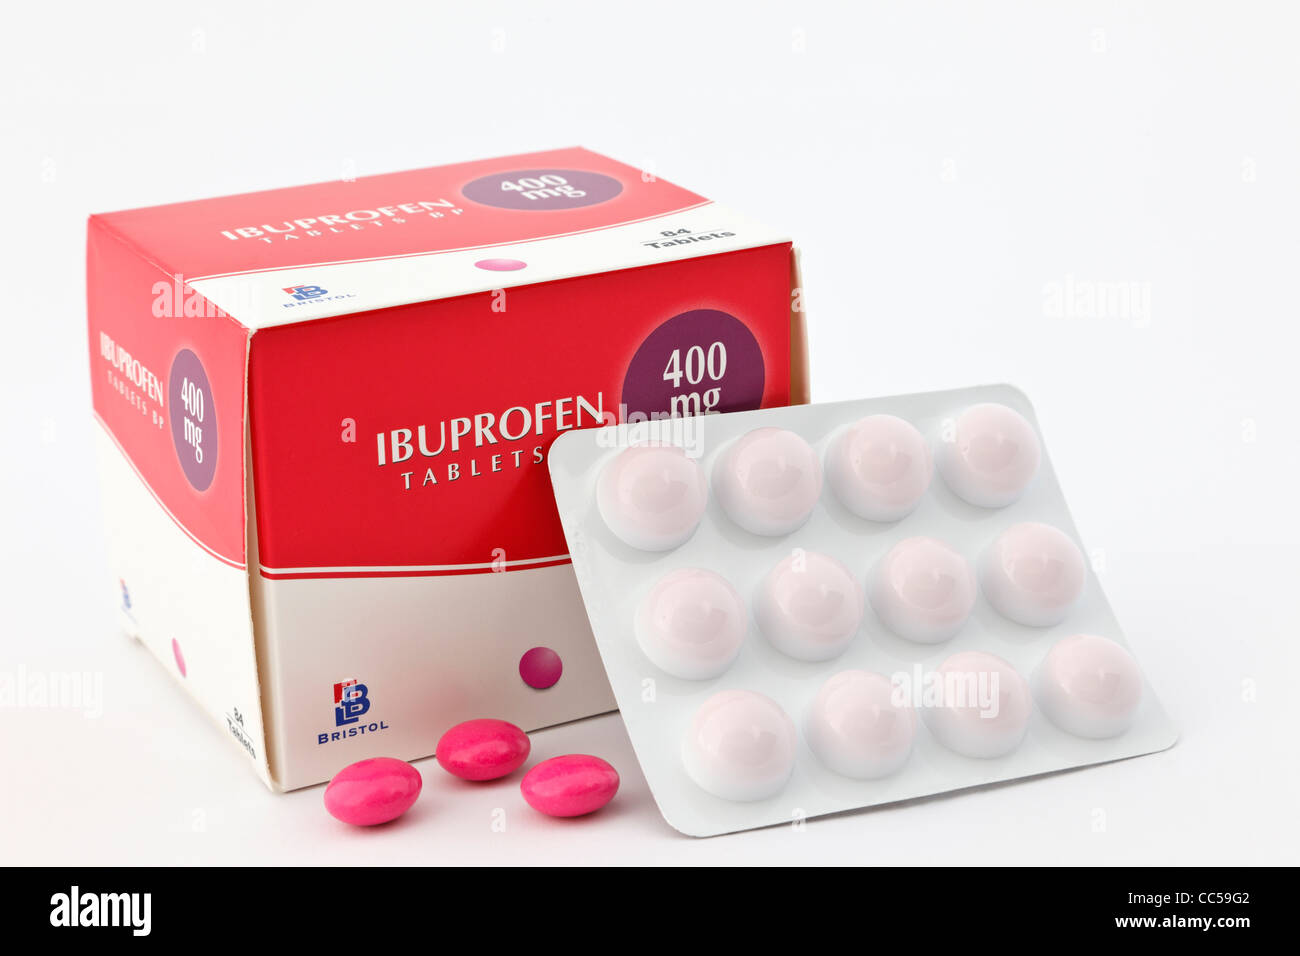 Box and blister pack of 400mg high strength Ibuprofen strong painkilling tablets for pain relief on a white background Stock Photo